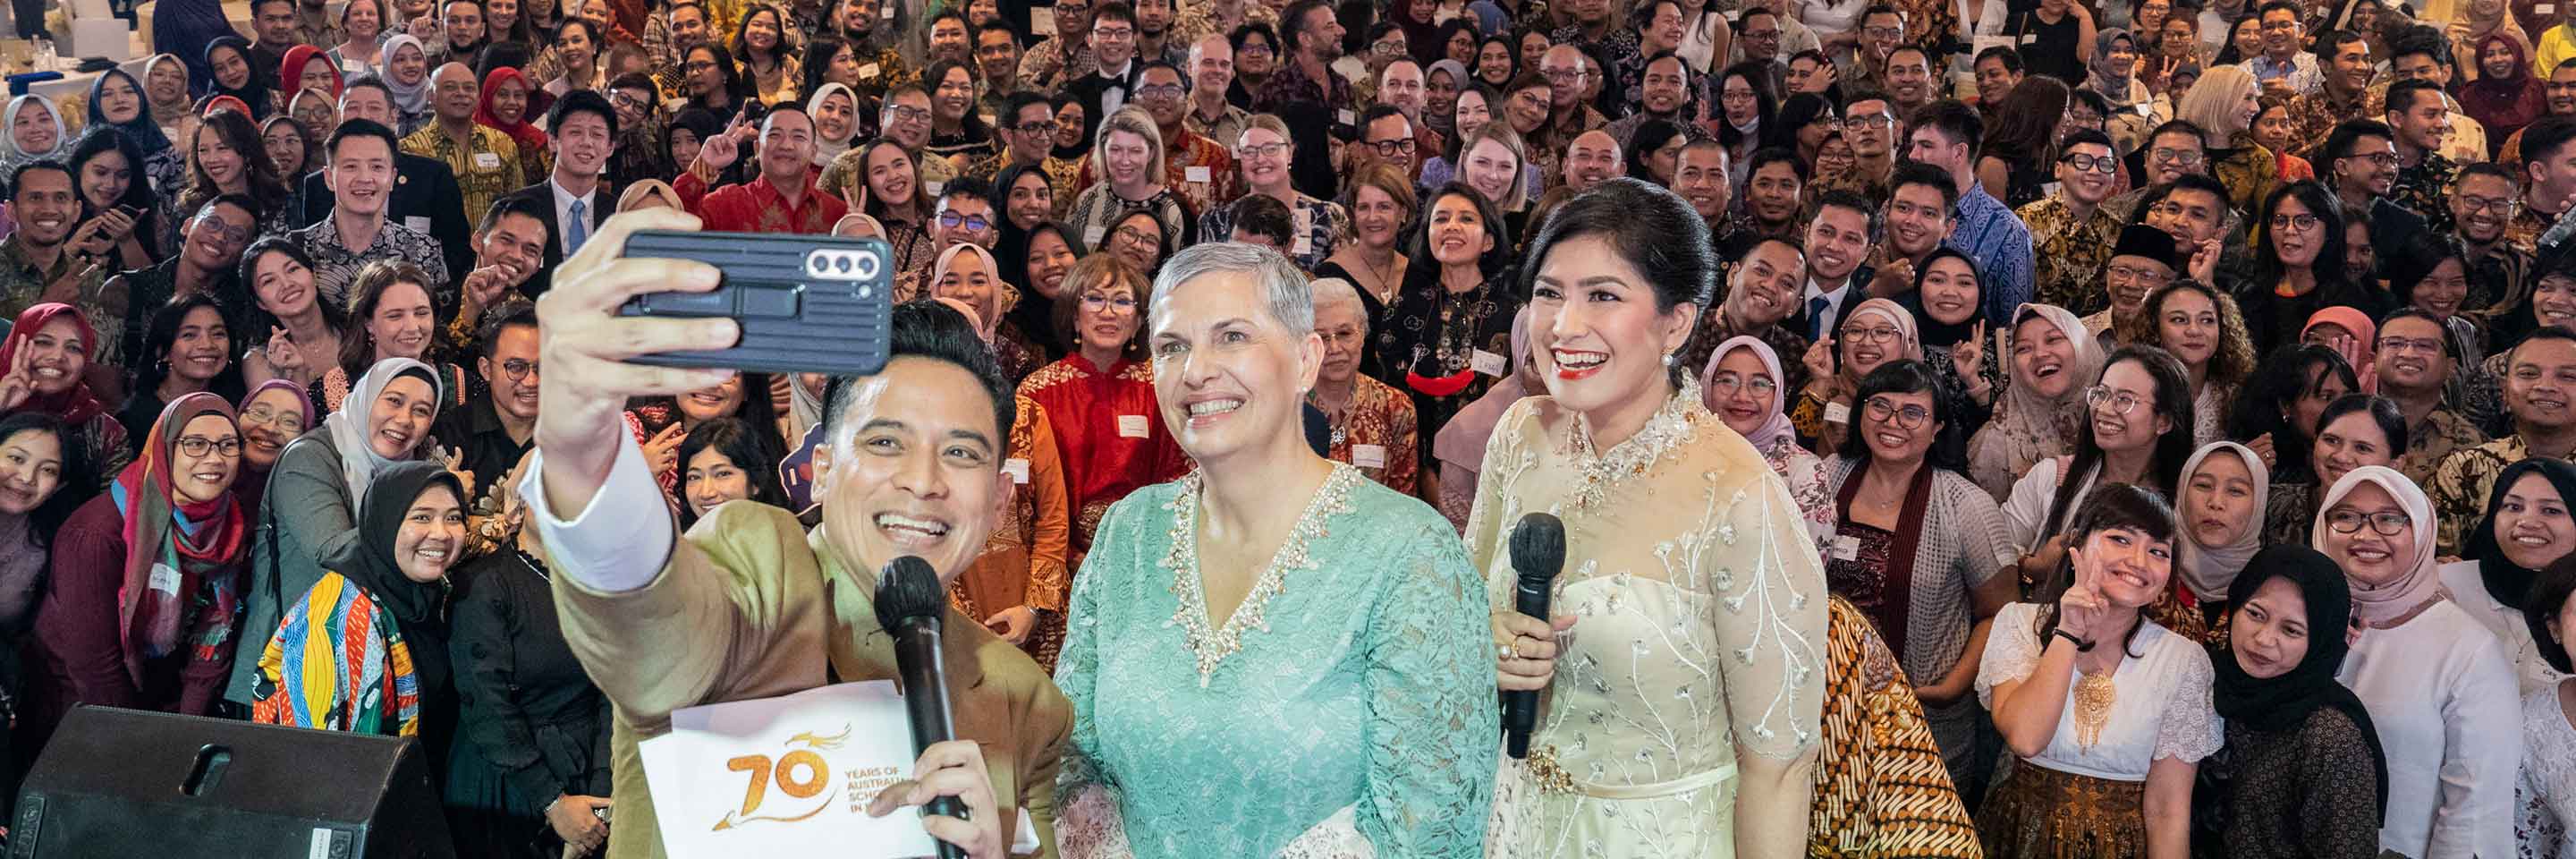 In commemoration of 70 years of Australian Scholarships in Indonesia, the Australian Ambassador to Indonesia hosts a prestigious Alumni Gala Dinner in Jakarta, a grand event attended by nearly 700 Indonesian graduates from Australian universities.